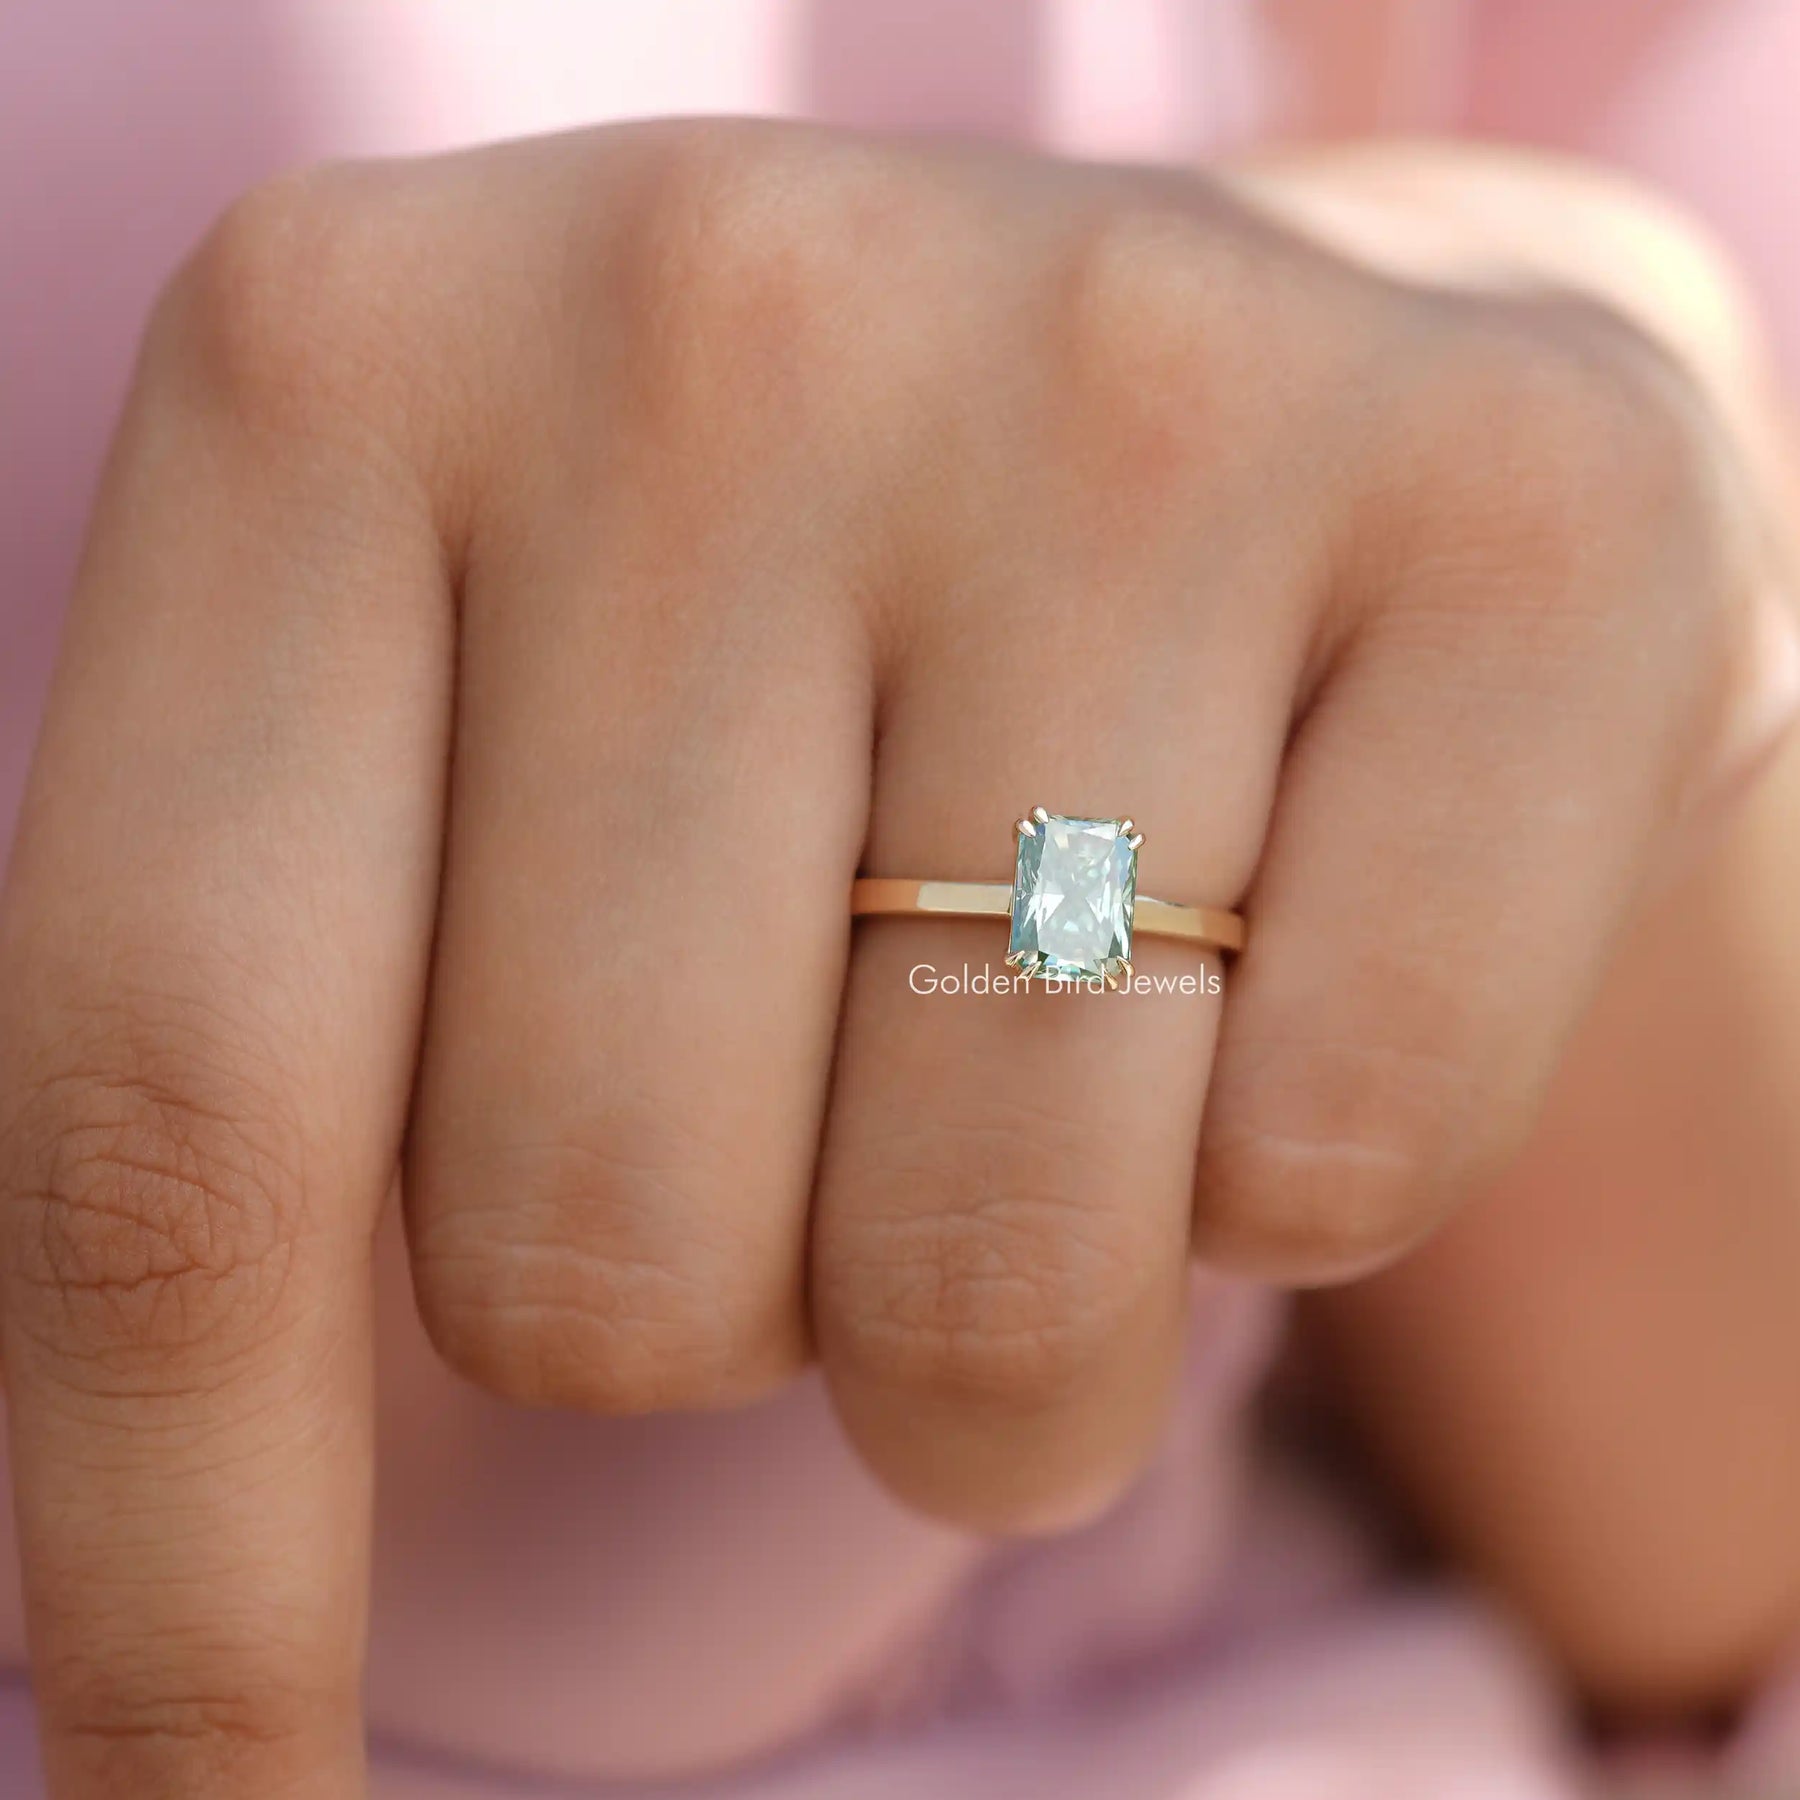 [Solitaire Radiant Cut Moissanite Engagement Ring]-[Golden Bird Jewels]